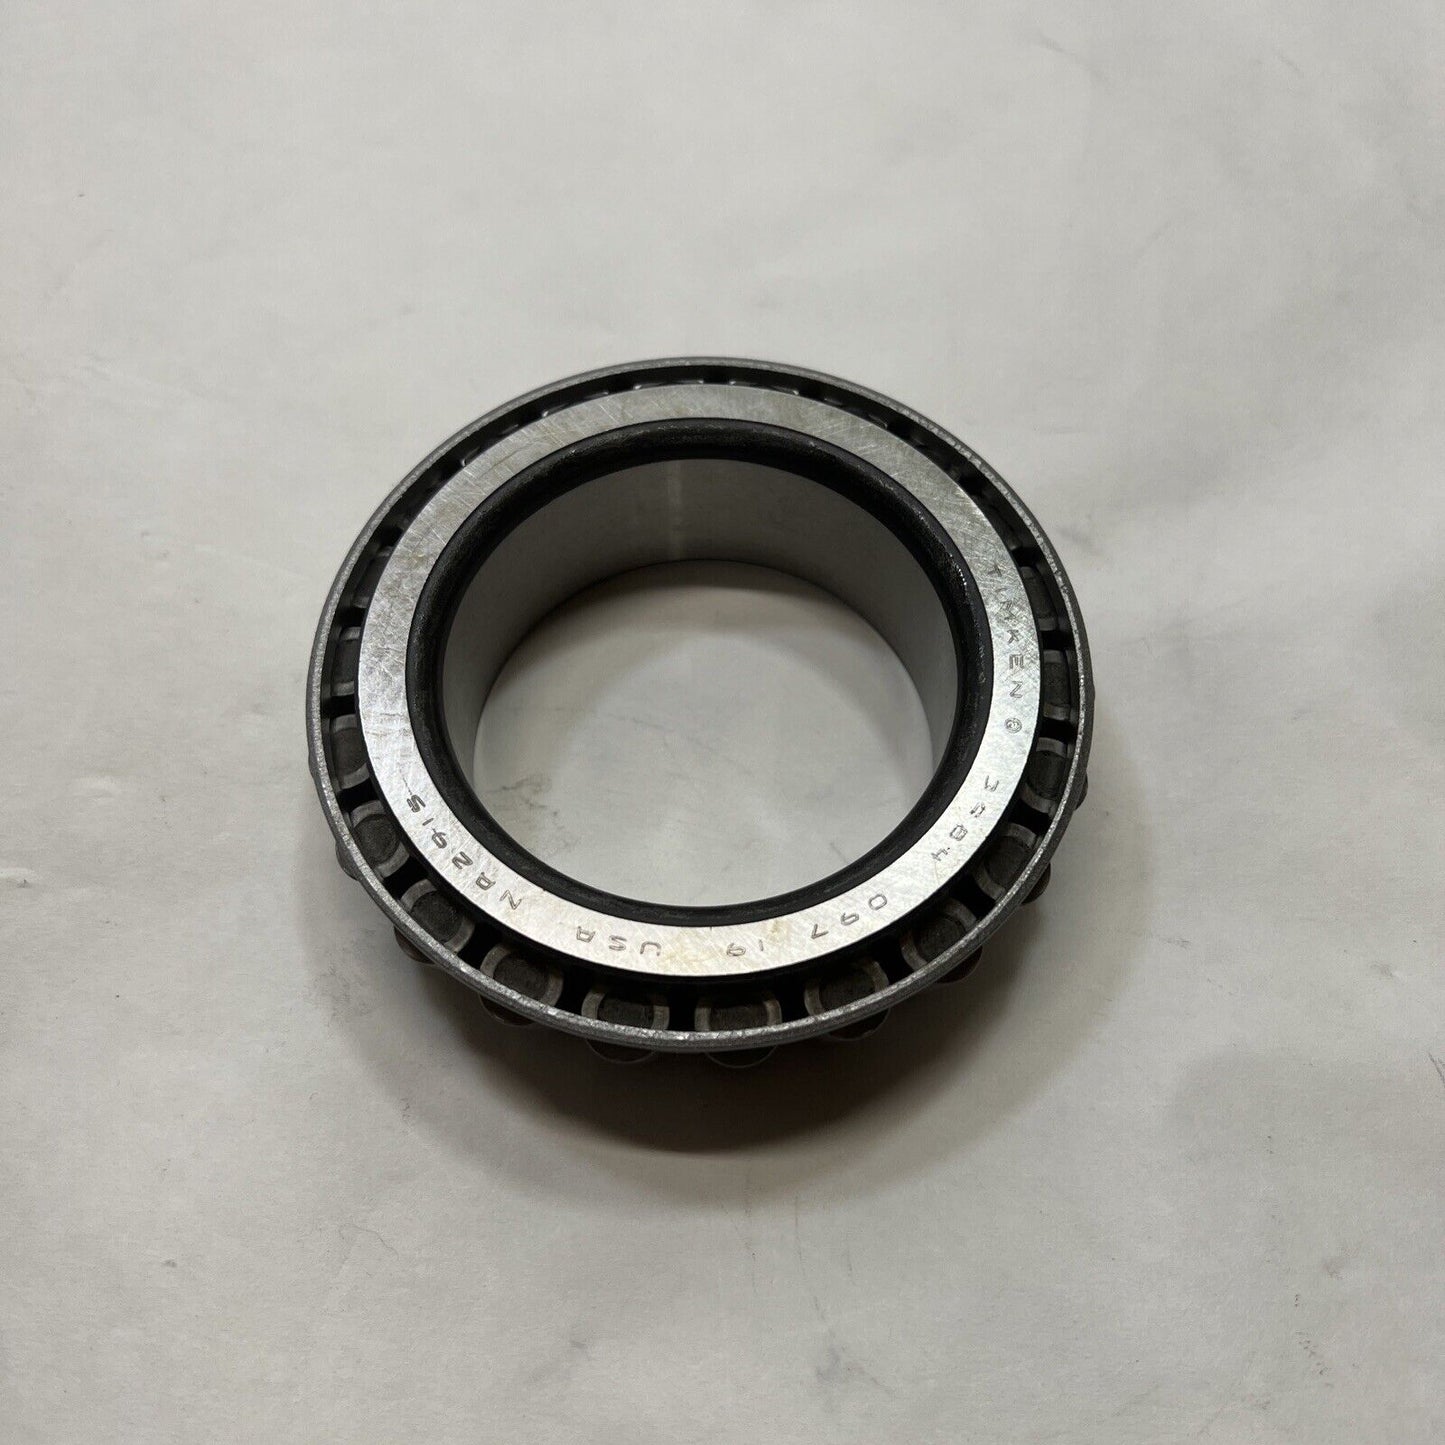 Genuine Ford Cone And Roller - Bearing B6T-1244-B